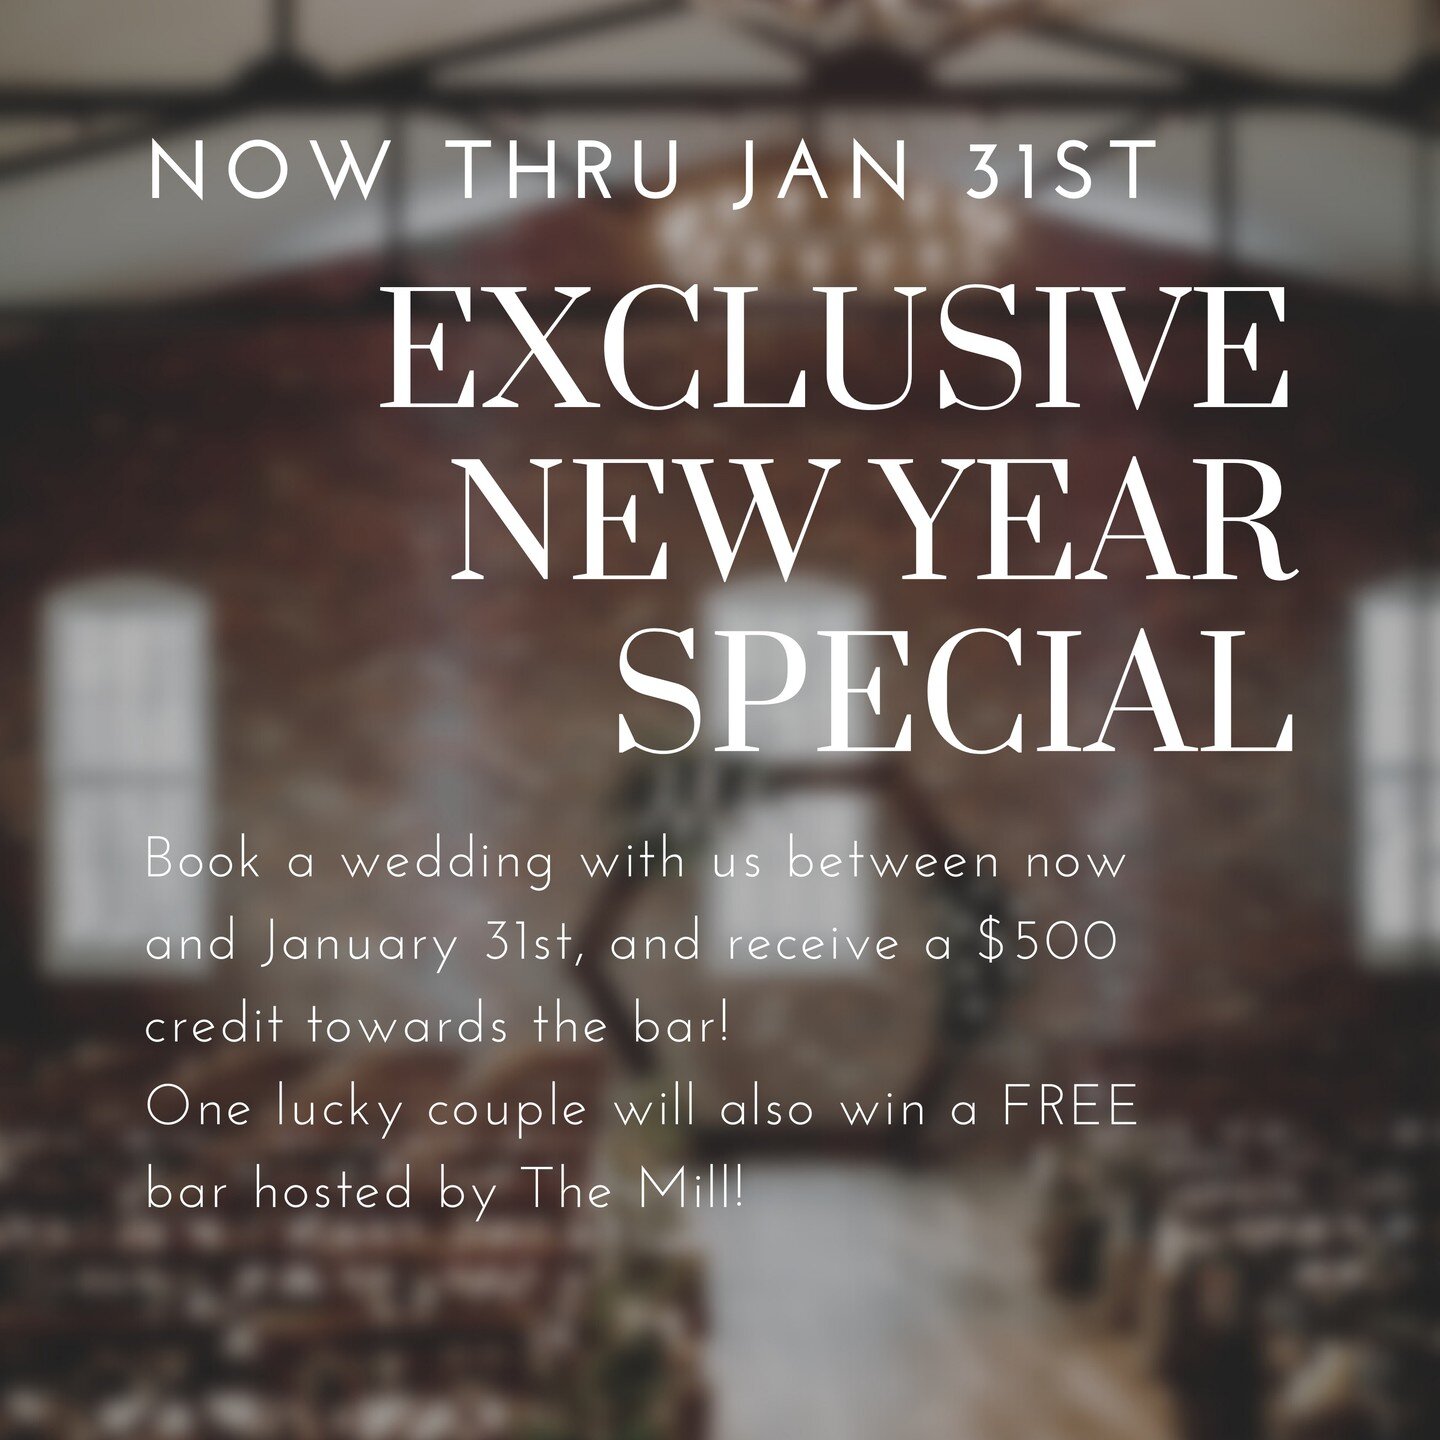 **GIVEAWAY** Book a wedding with us between now and January 31st, and receive a $500 credit towards the bar! One lucky couple will also win a FREE bar hosted by The Mill!

#luxurywedding #weddingwire #modernbride #brides #weddingfashion #married #bri